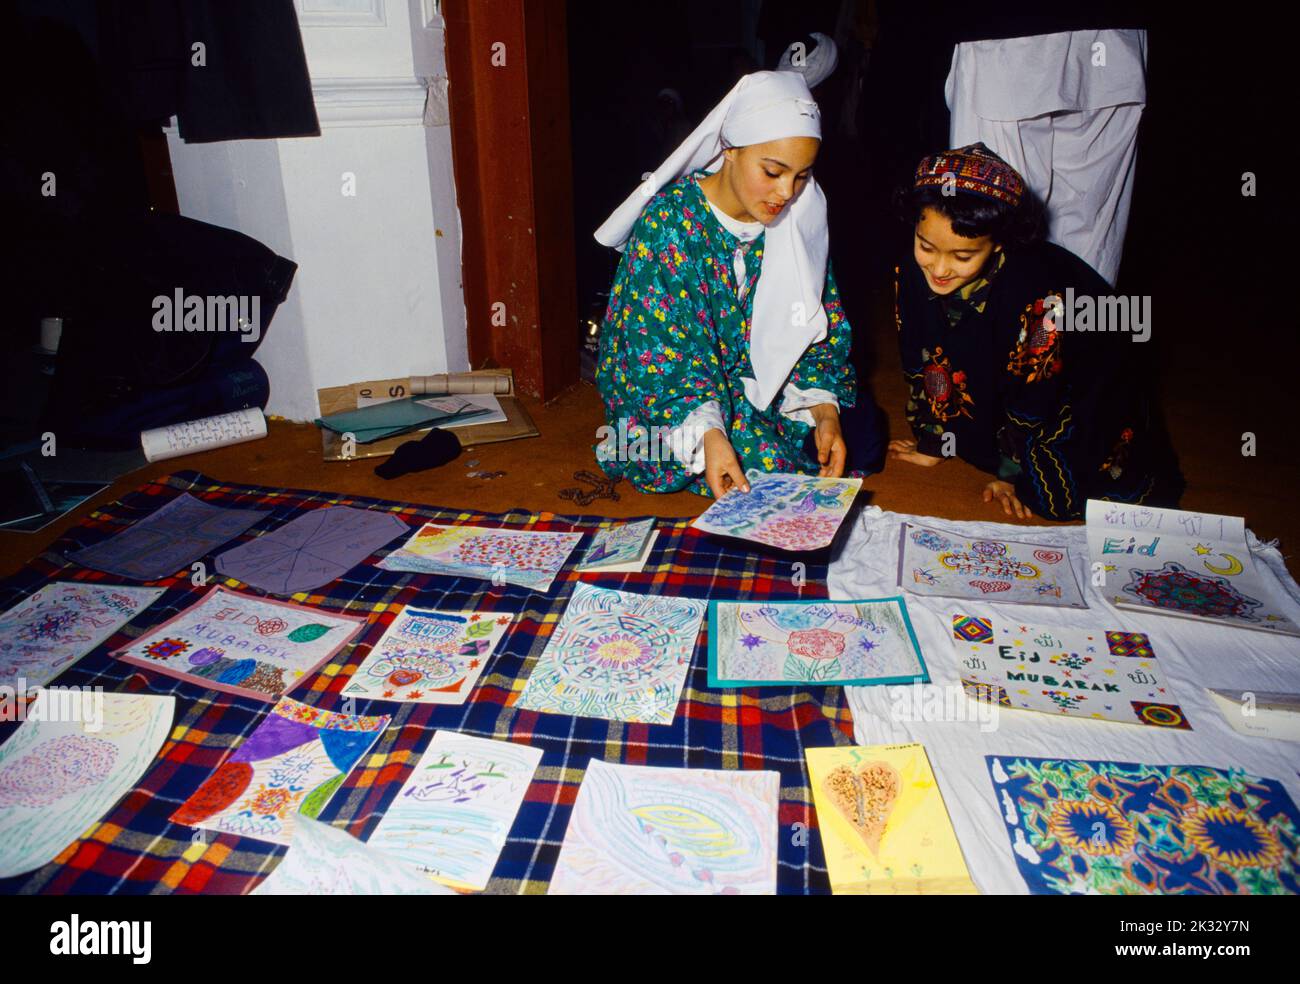 Peckham Mosque London England Children With Home Made Eid Cards Stock Photo